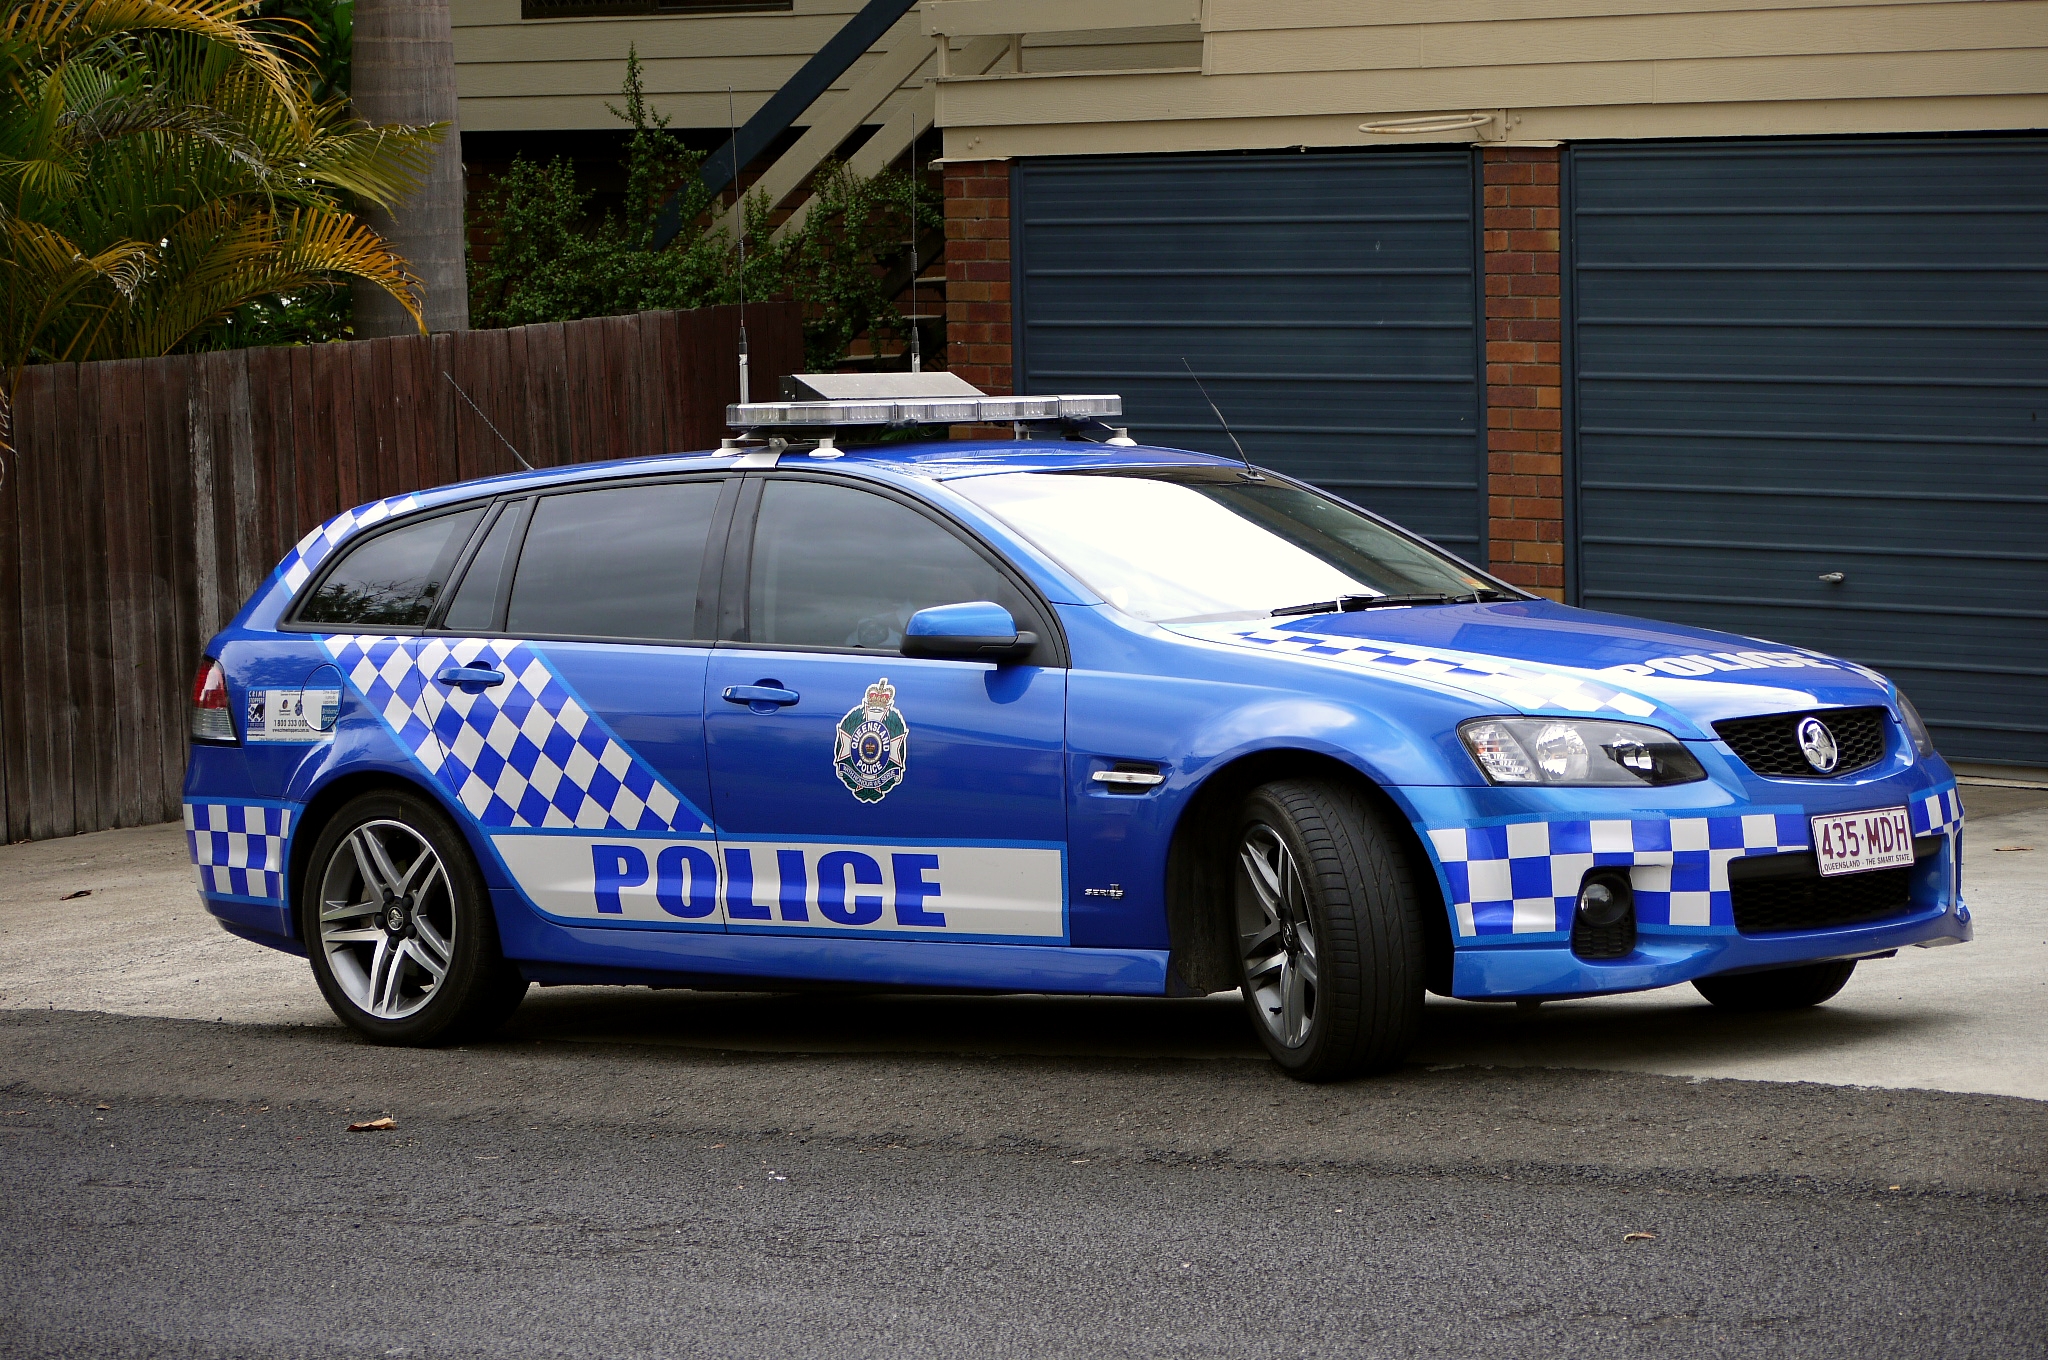 Queensland Police Service Traffic Branch Commodore SV6 Sportswagon - Flickr - Highway Patrol Images